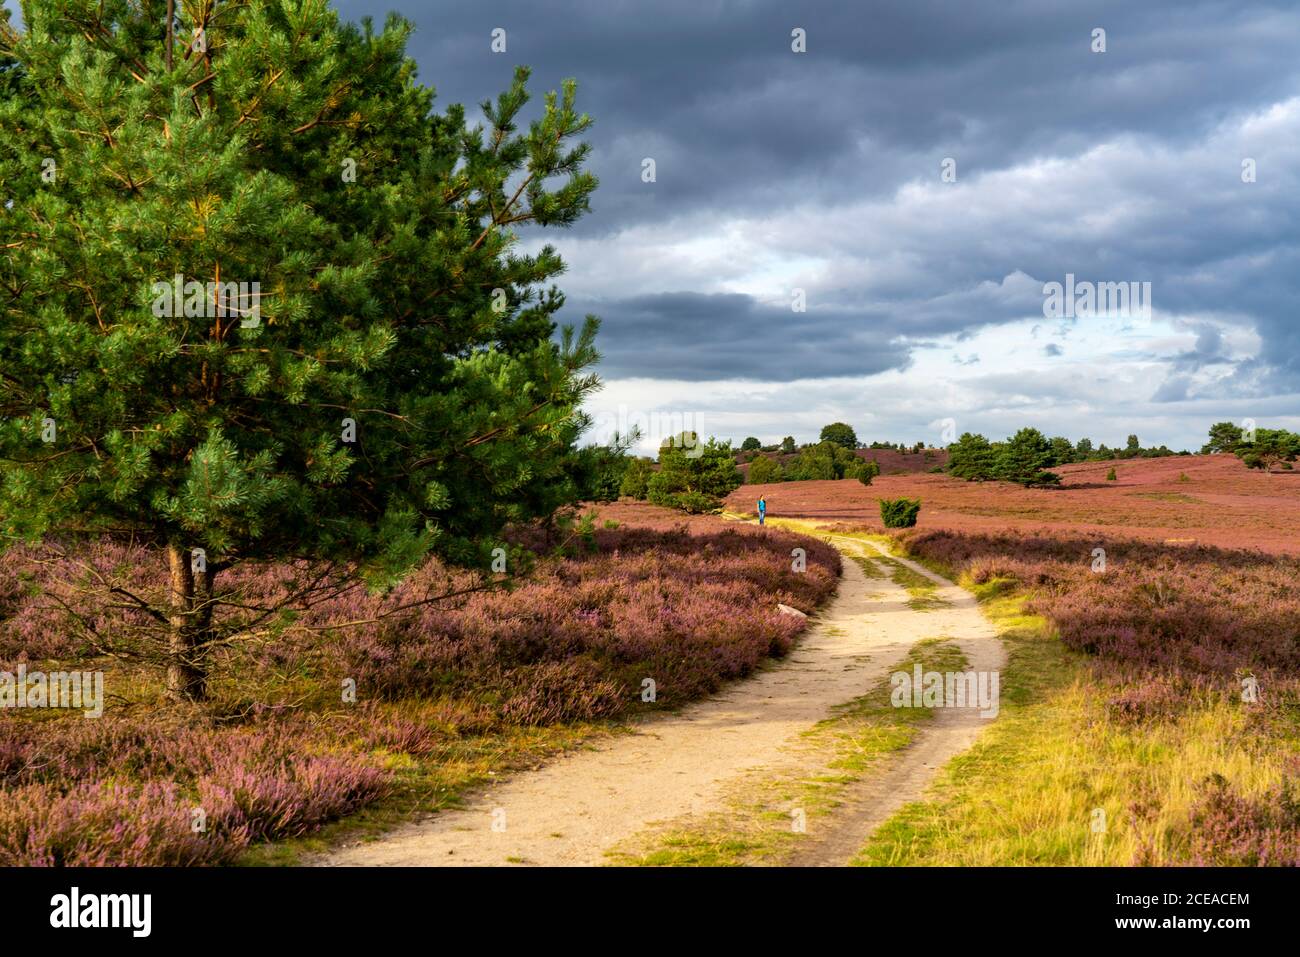 Blooming heath, broom heath and juniper bushes, at the Wilseder Mountain area, in the nature reserve Lüneburg Heath, Lower Saxony, Germany, Stock Photo